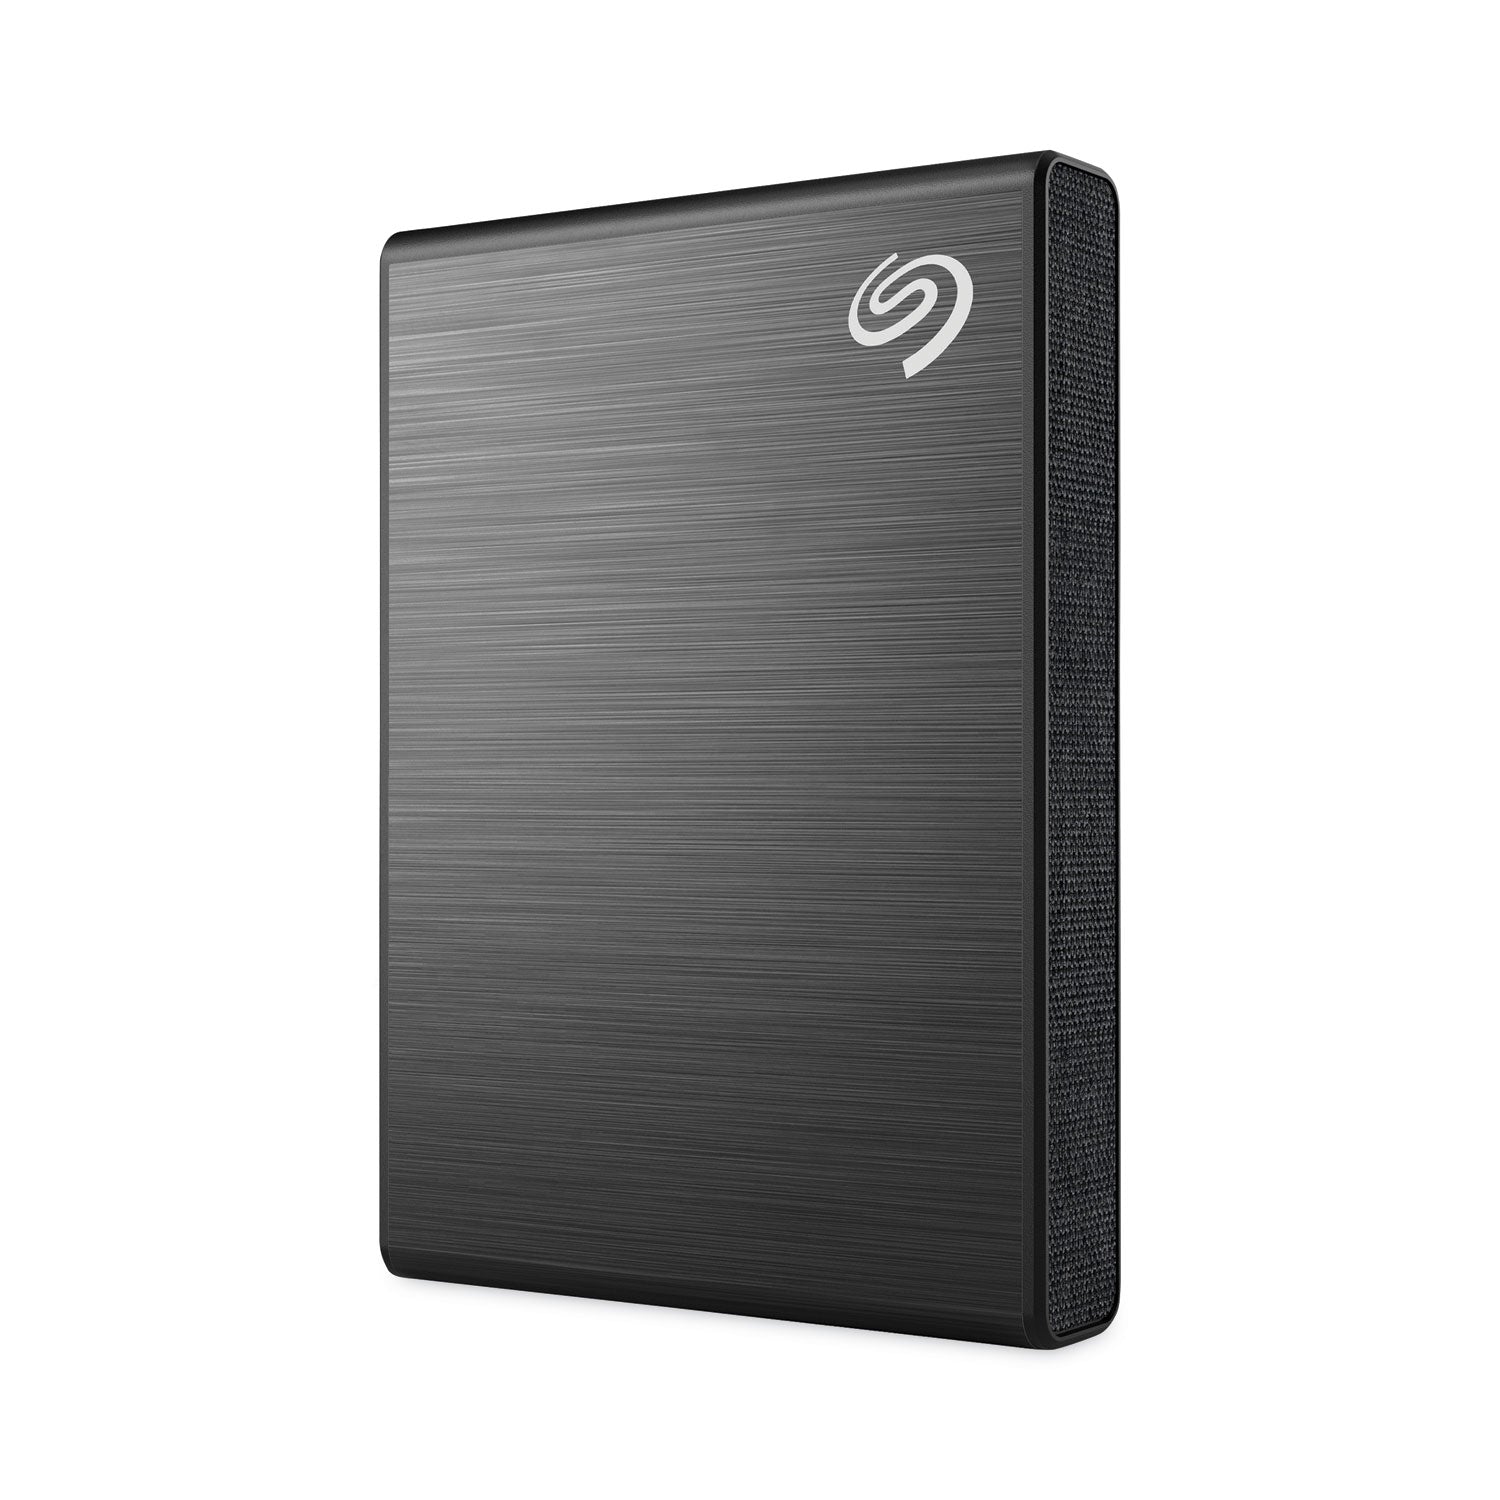 one-touch-external-solid-state-drive-1-tb-usb-30-black_sgtstkg1000400 - 1